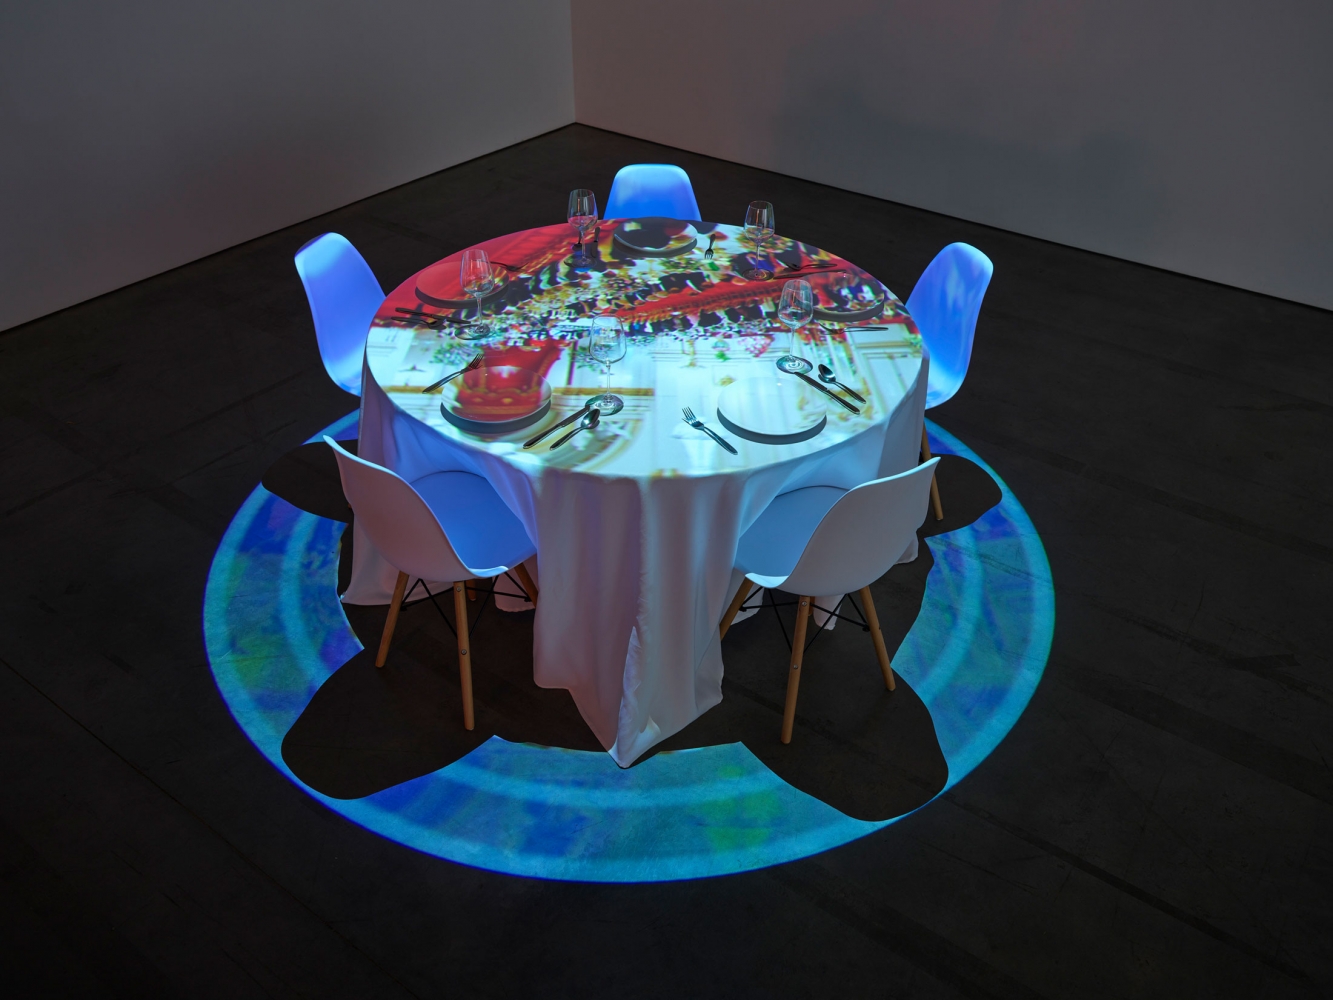 Pipilotti Rist
Streichelnder Nachtmahl Kreis 25 Knickerbocker Ave (Caressing Dinner Circle 25 Knickerbocker Ave), 2020
Video Installation for a round table, silent
Dimensions variable
From the&amp;nbsp;Caressing Dinner Circle Family